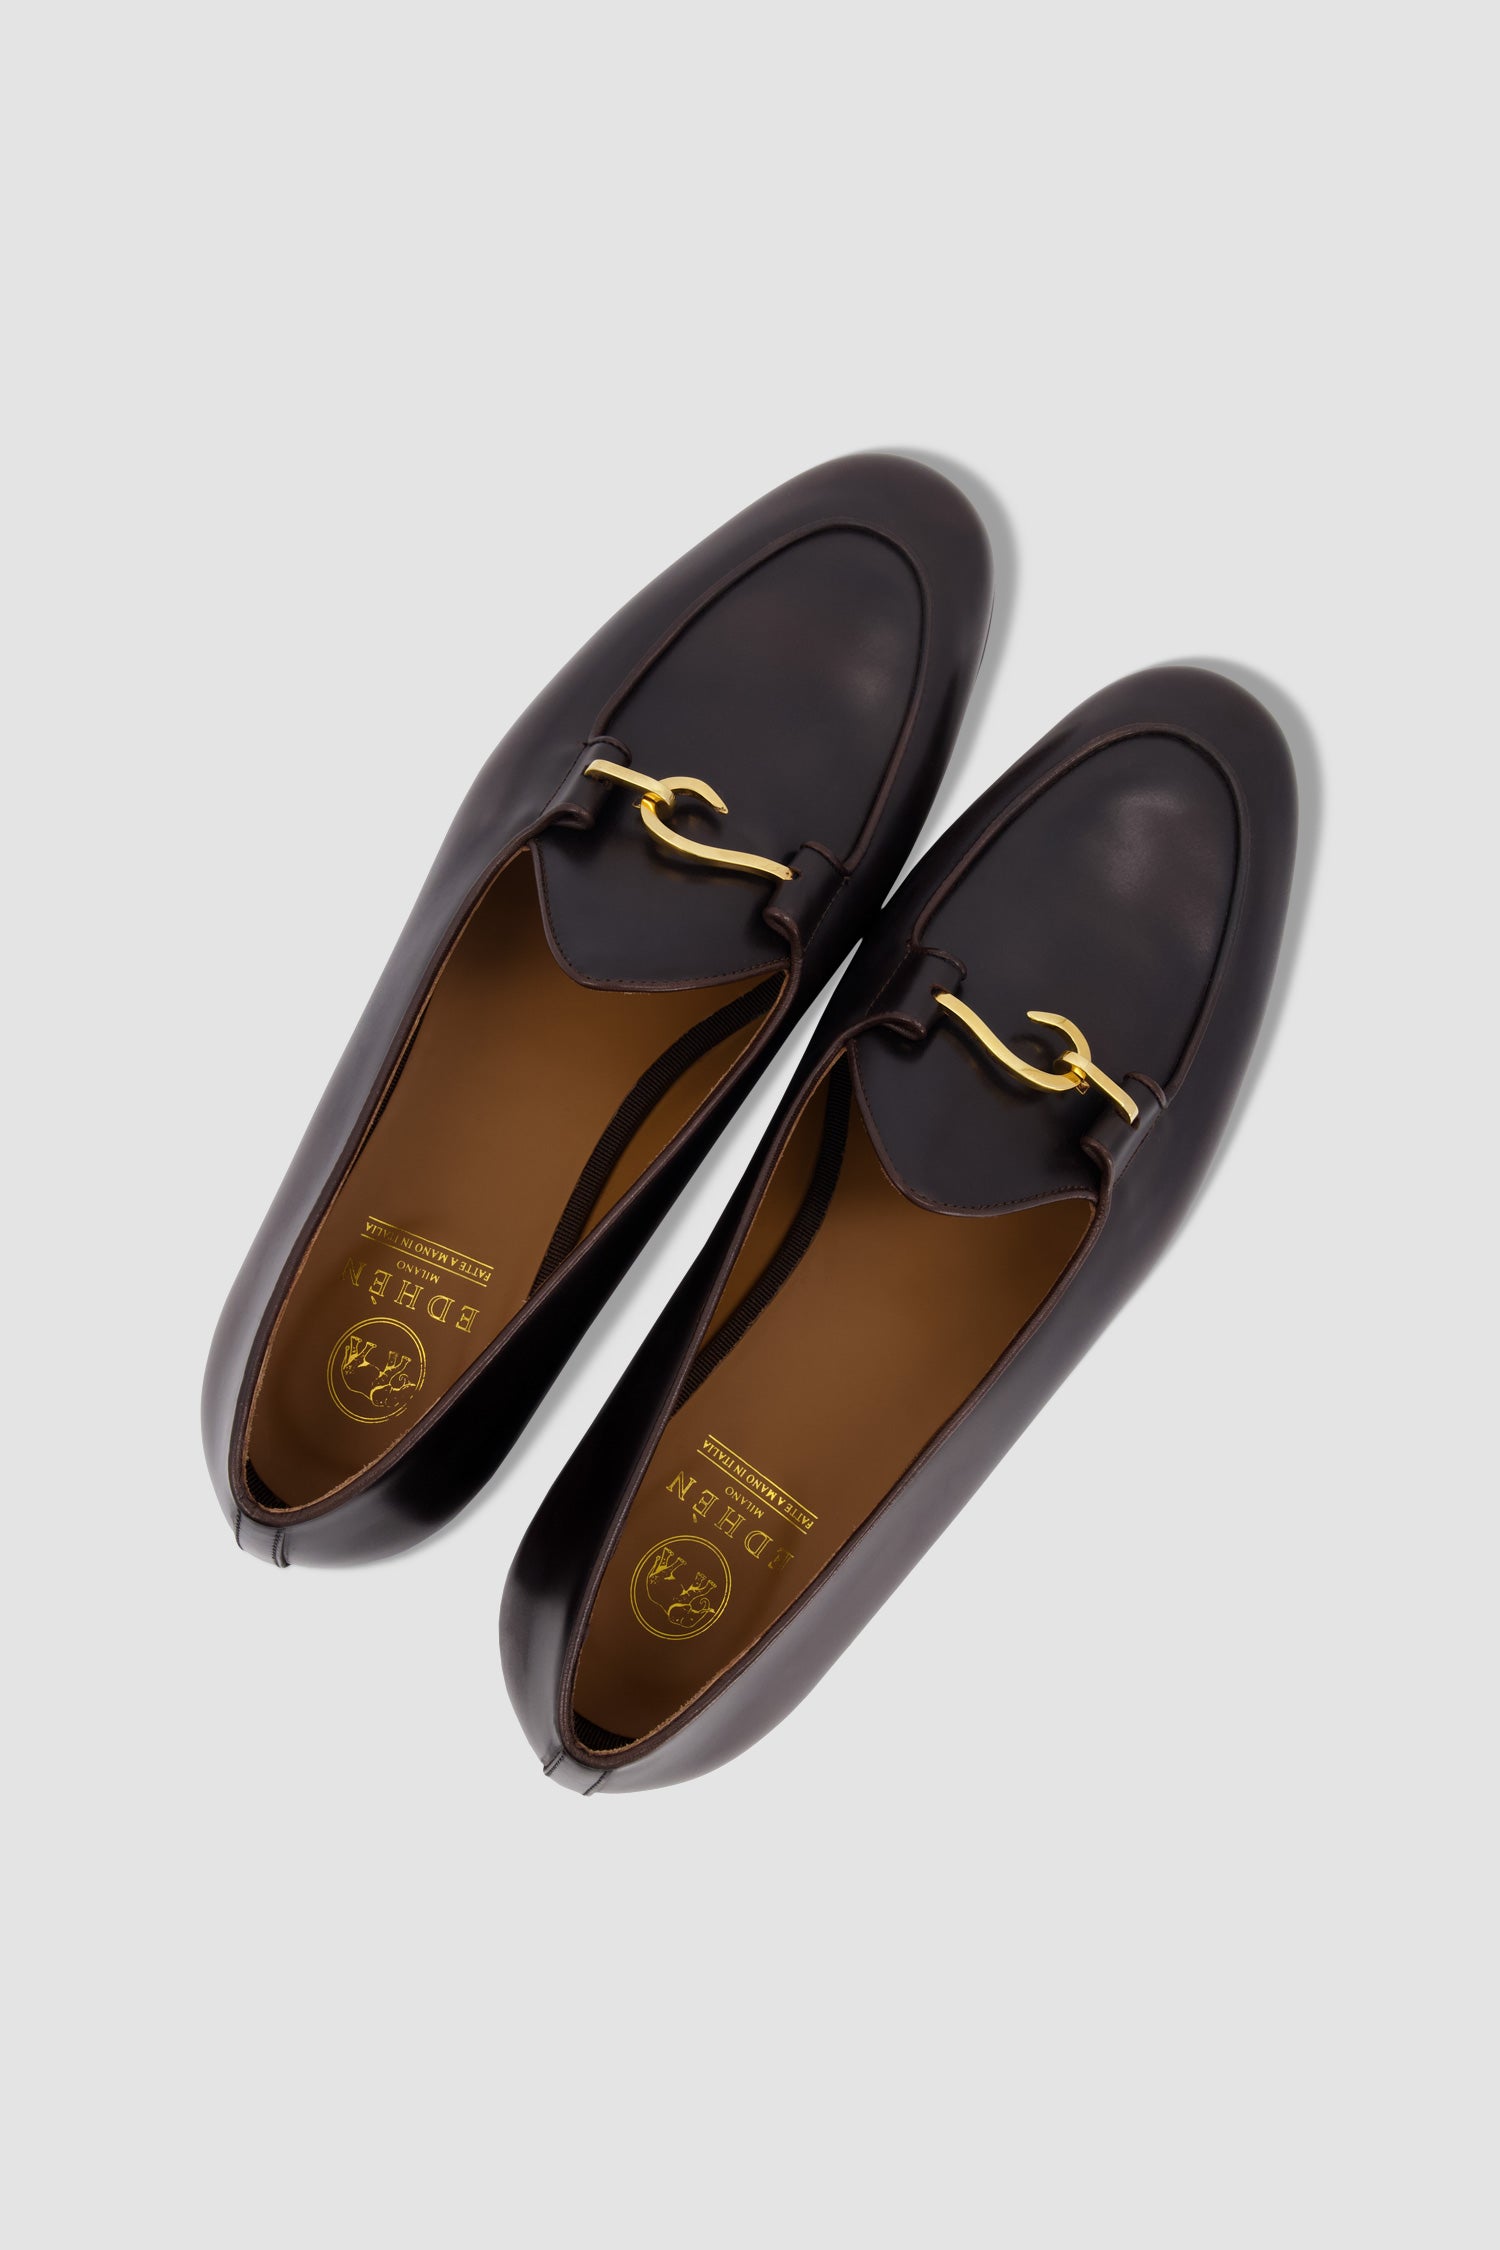 Edhen Milano Comporta Lock Brown Leather Loafers